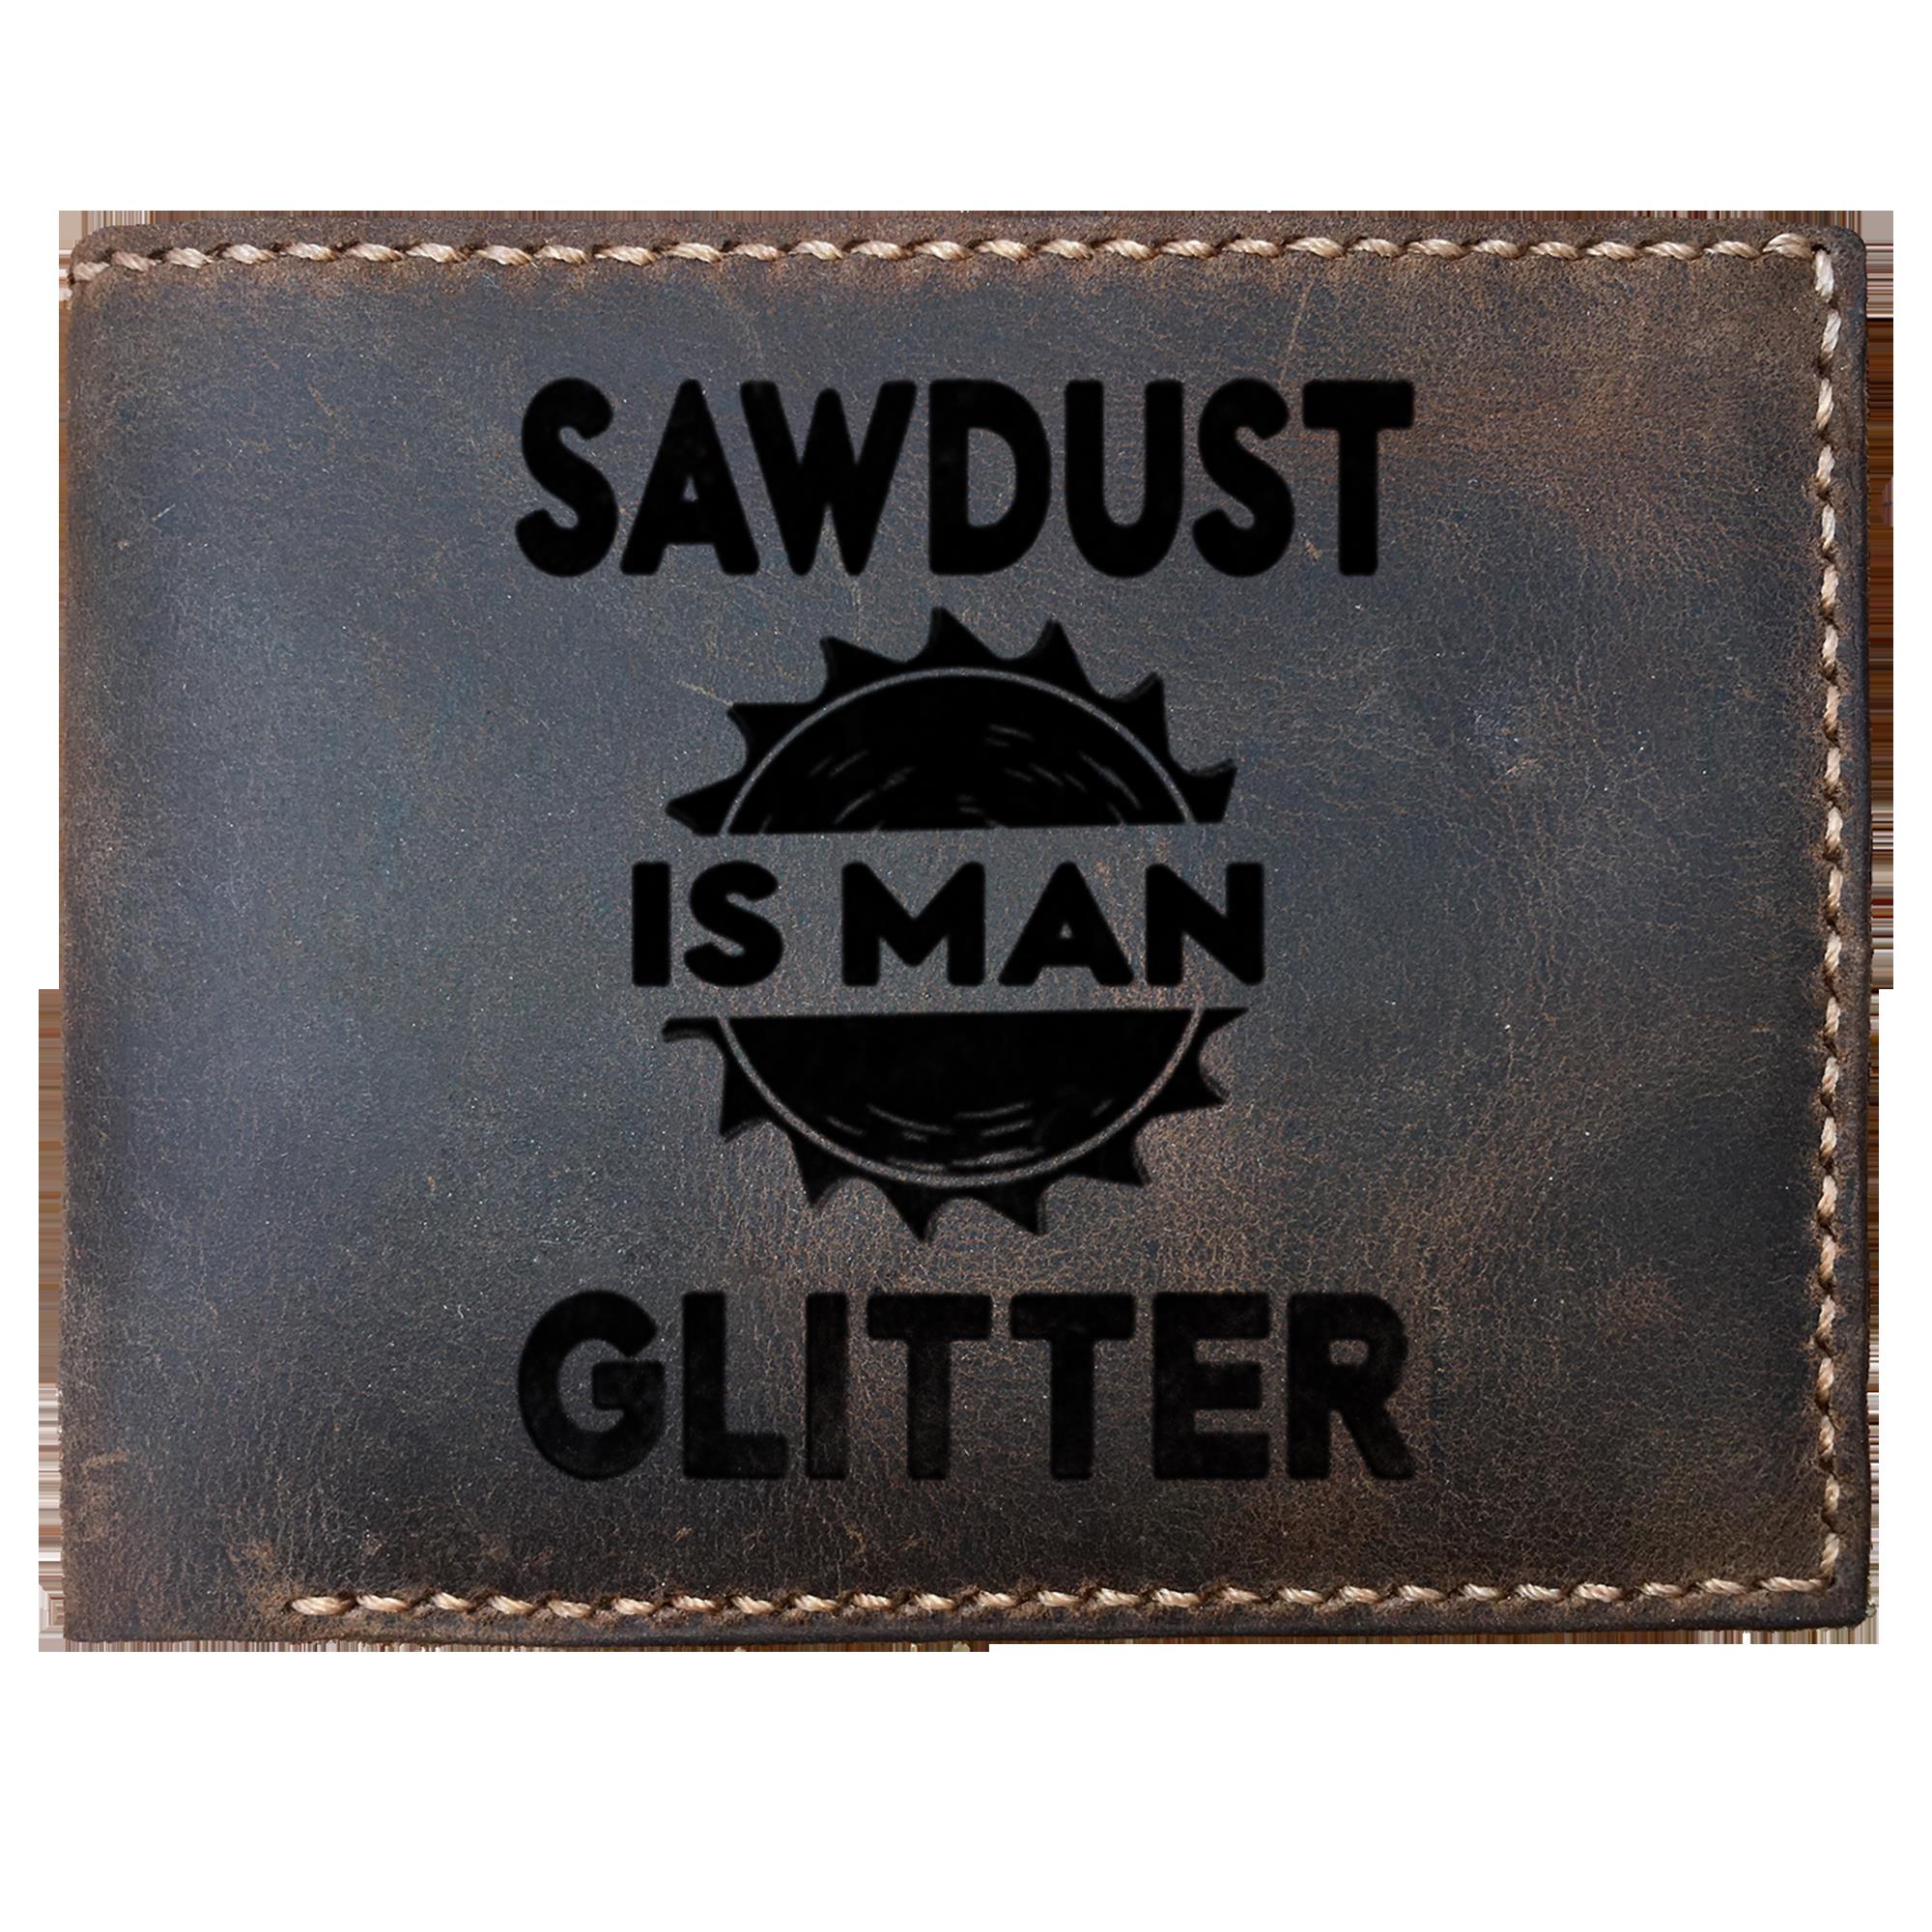 Skitongifts Funny Custom Laser Engraved Bifold Leather Wallet For Men, Wood Worker Sawdust Is Man Glitter